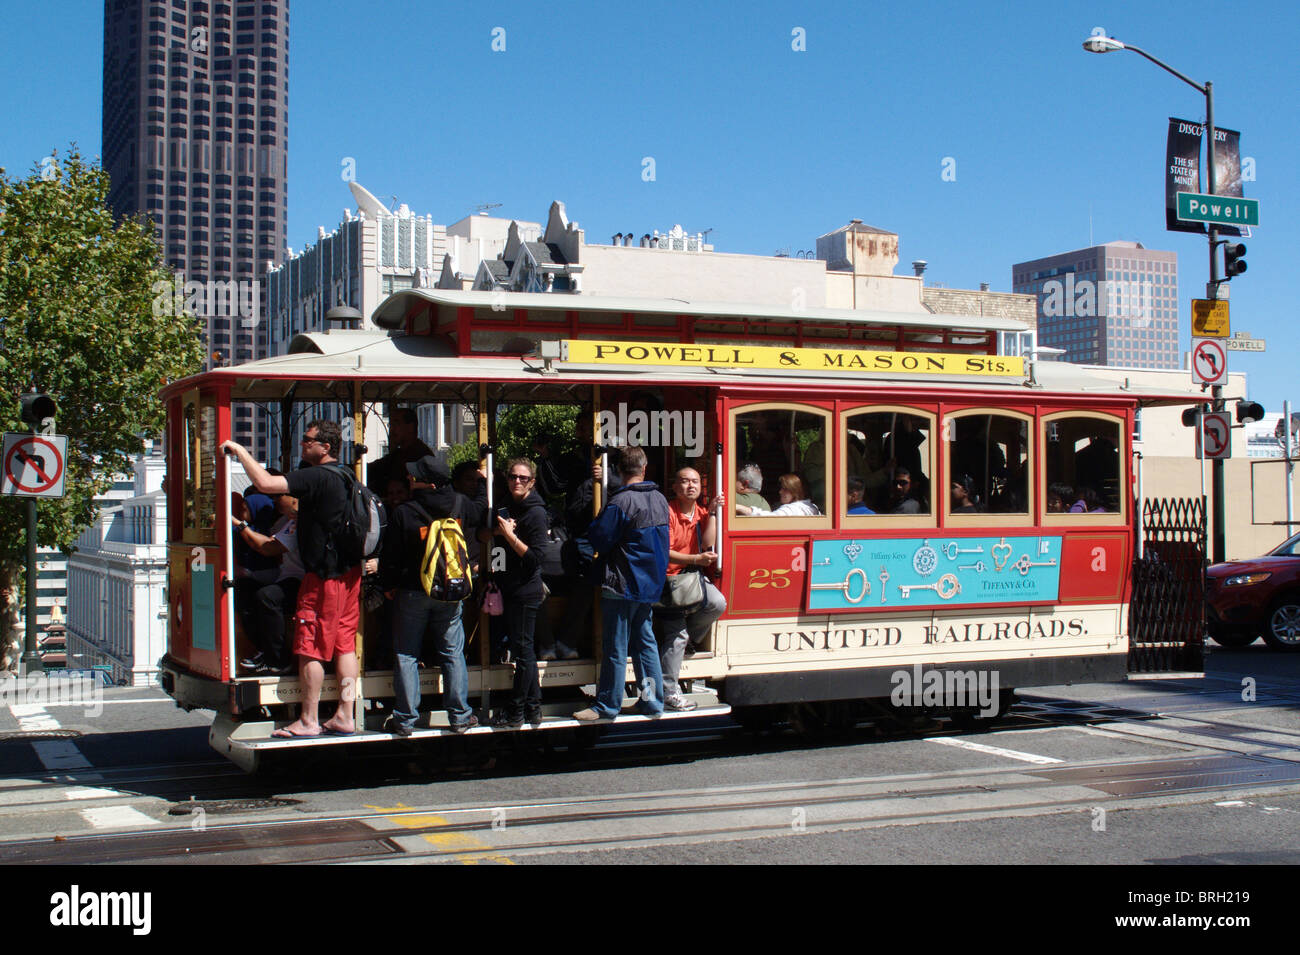 A tram on a street in San Francisco in California, United States Stock Photo